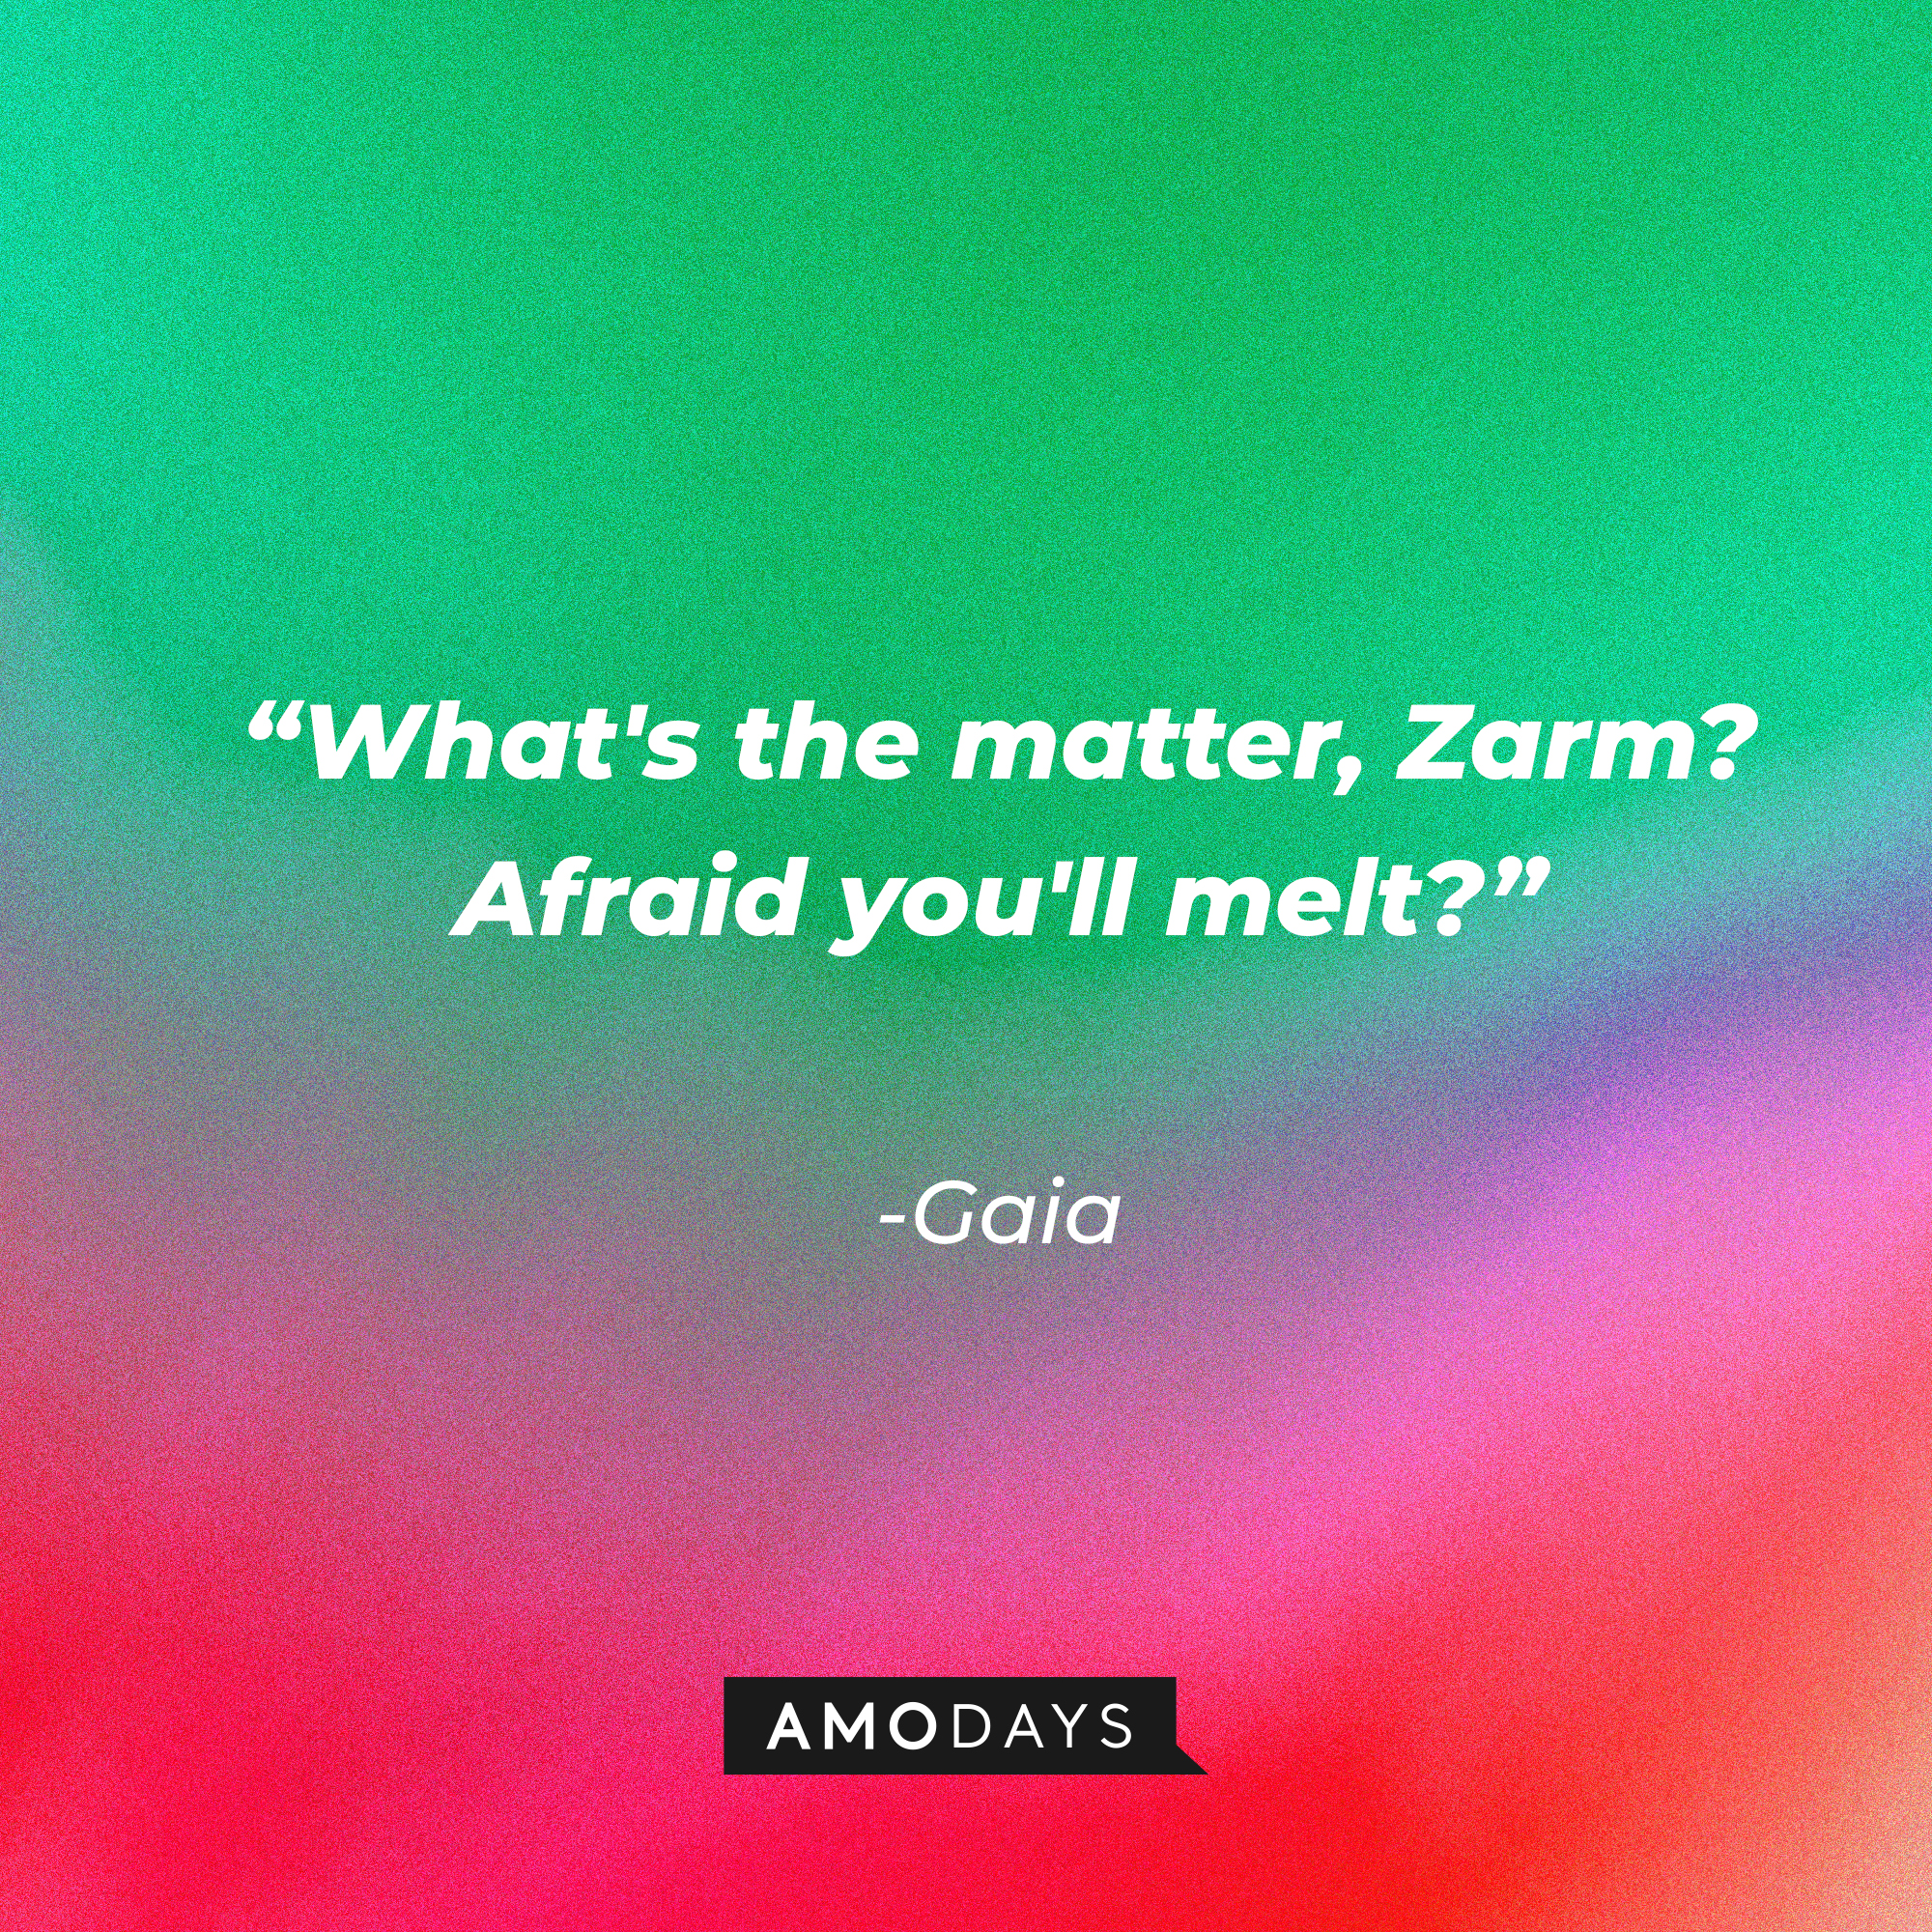 Gaia's quote: “What's the matter, Zarm? Afraid you'll melt?” | Source: Amodays